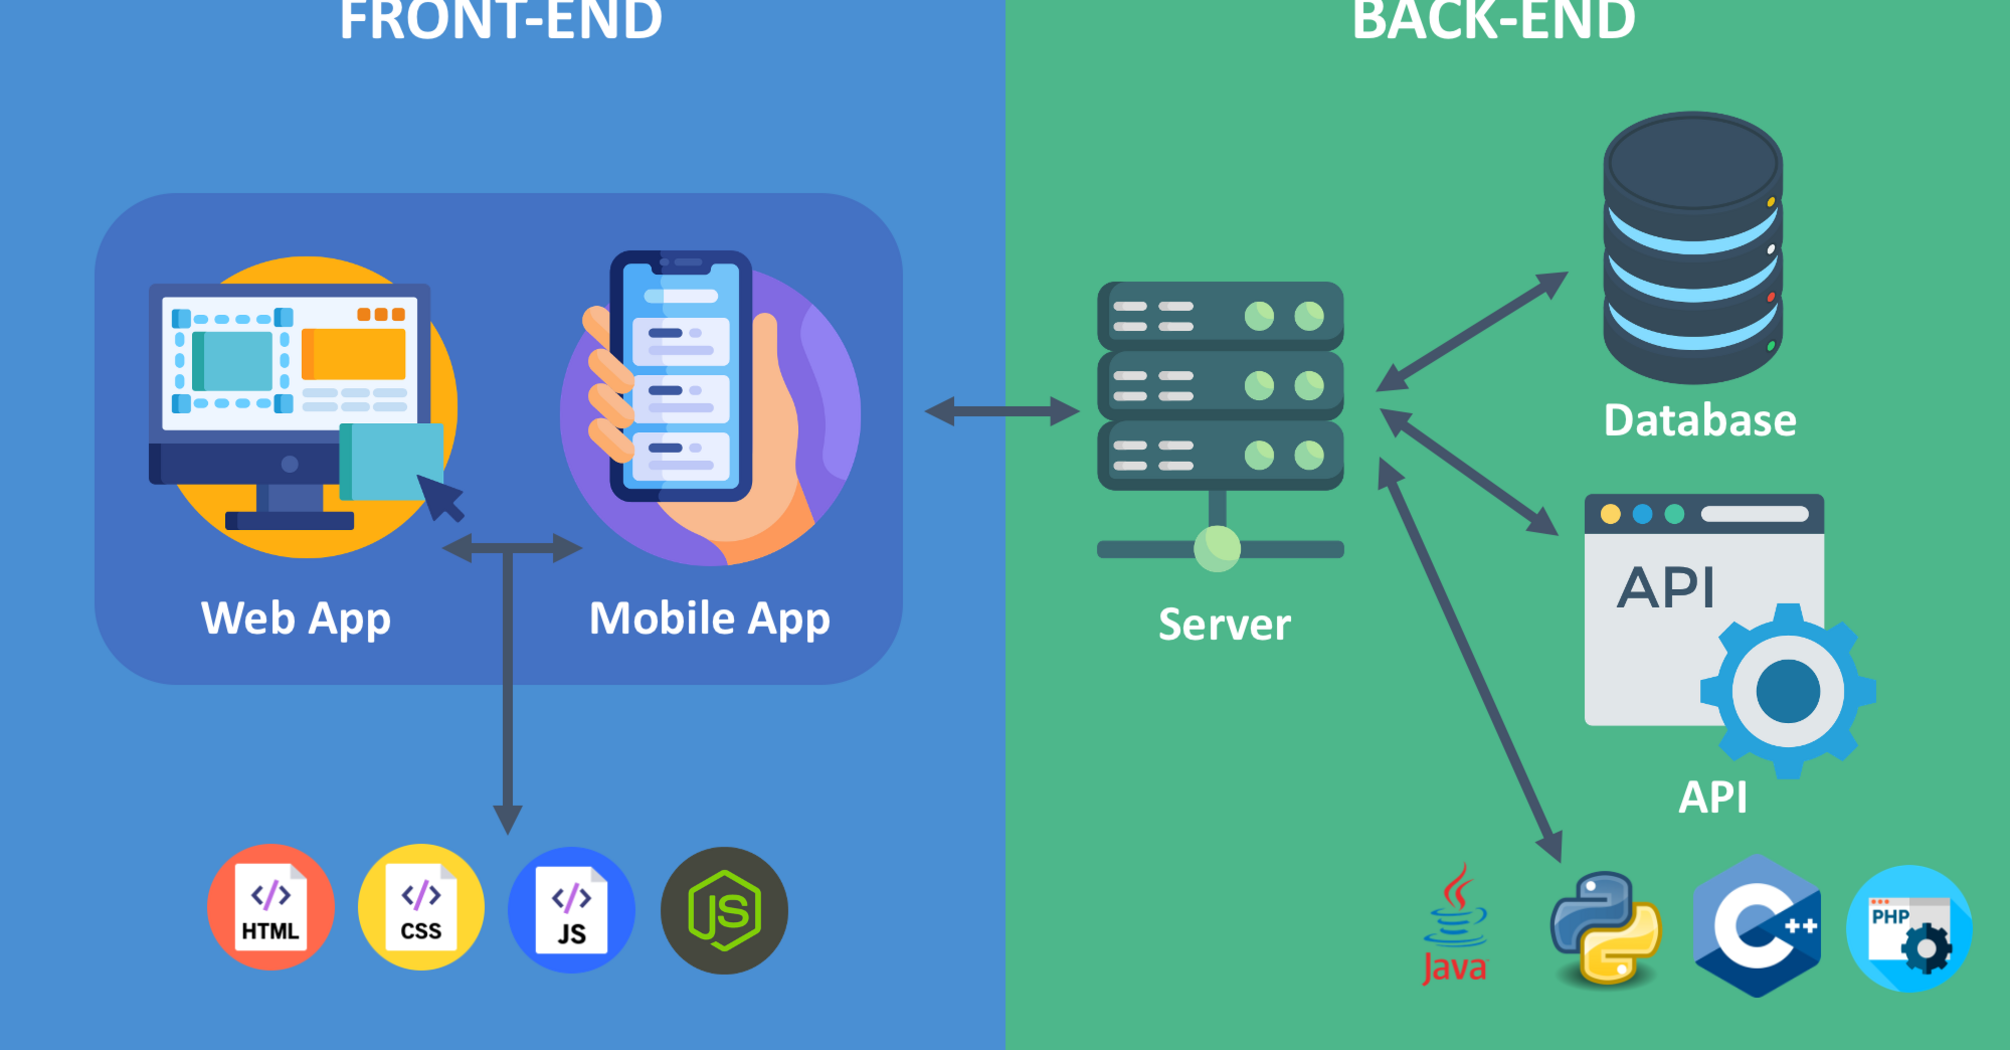 Frontend or Backend